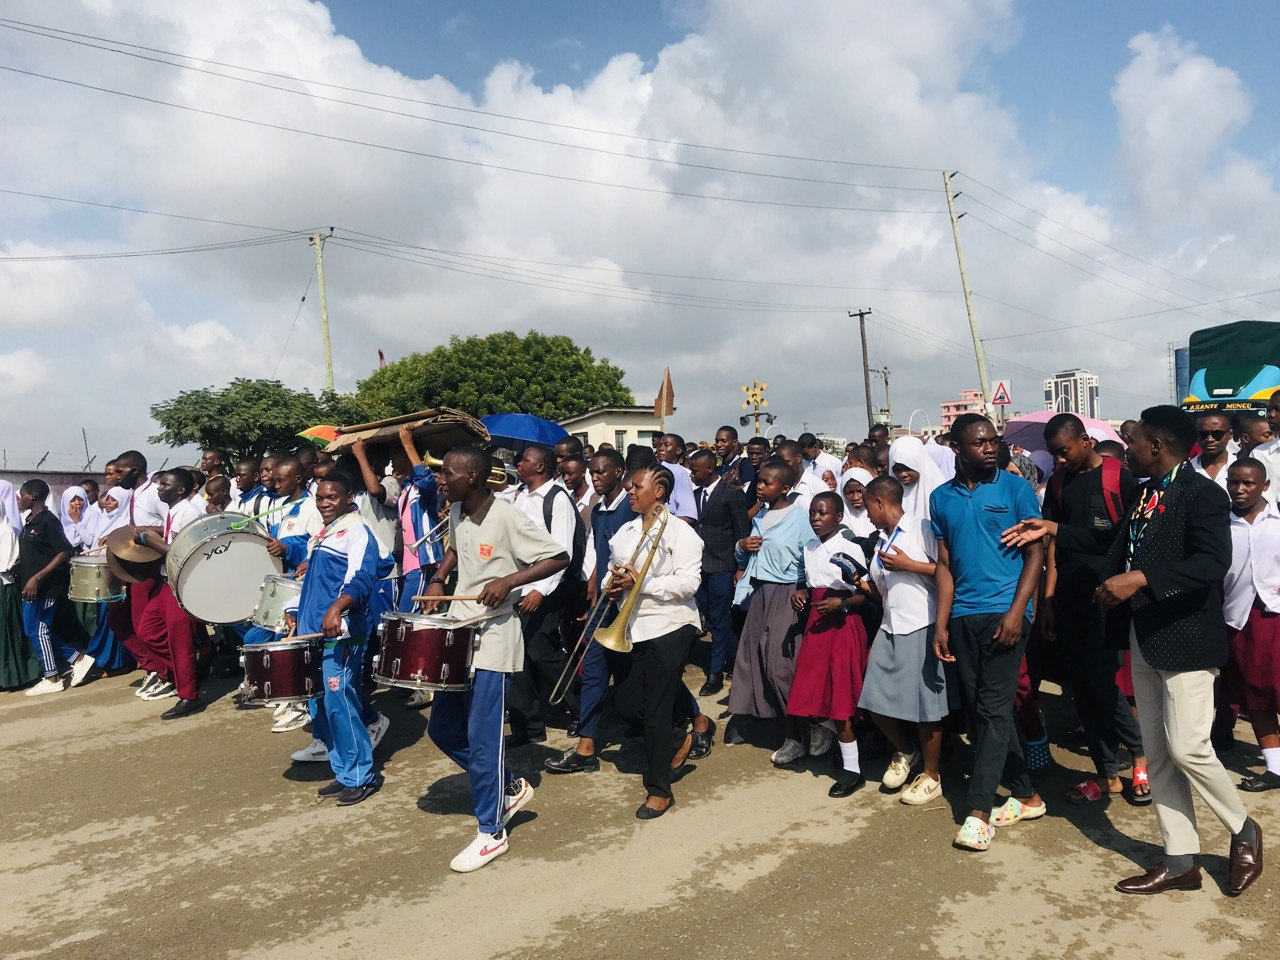 A crowd of adults and school children march but with no banners.